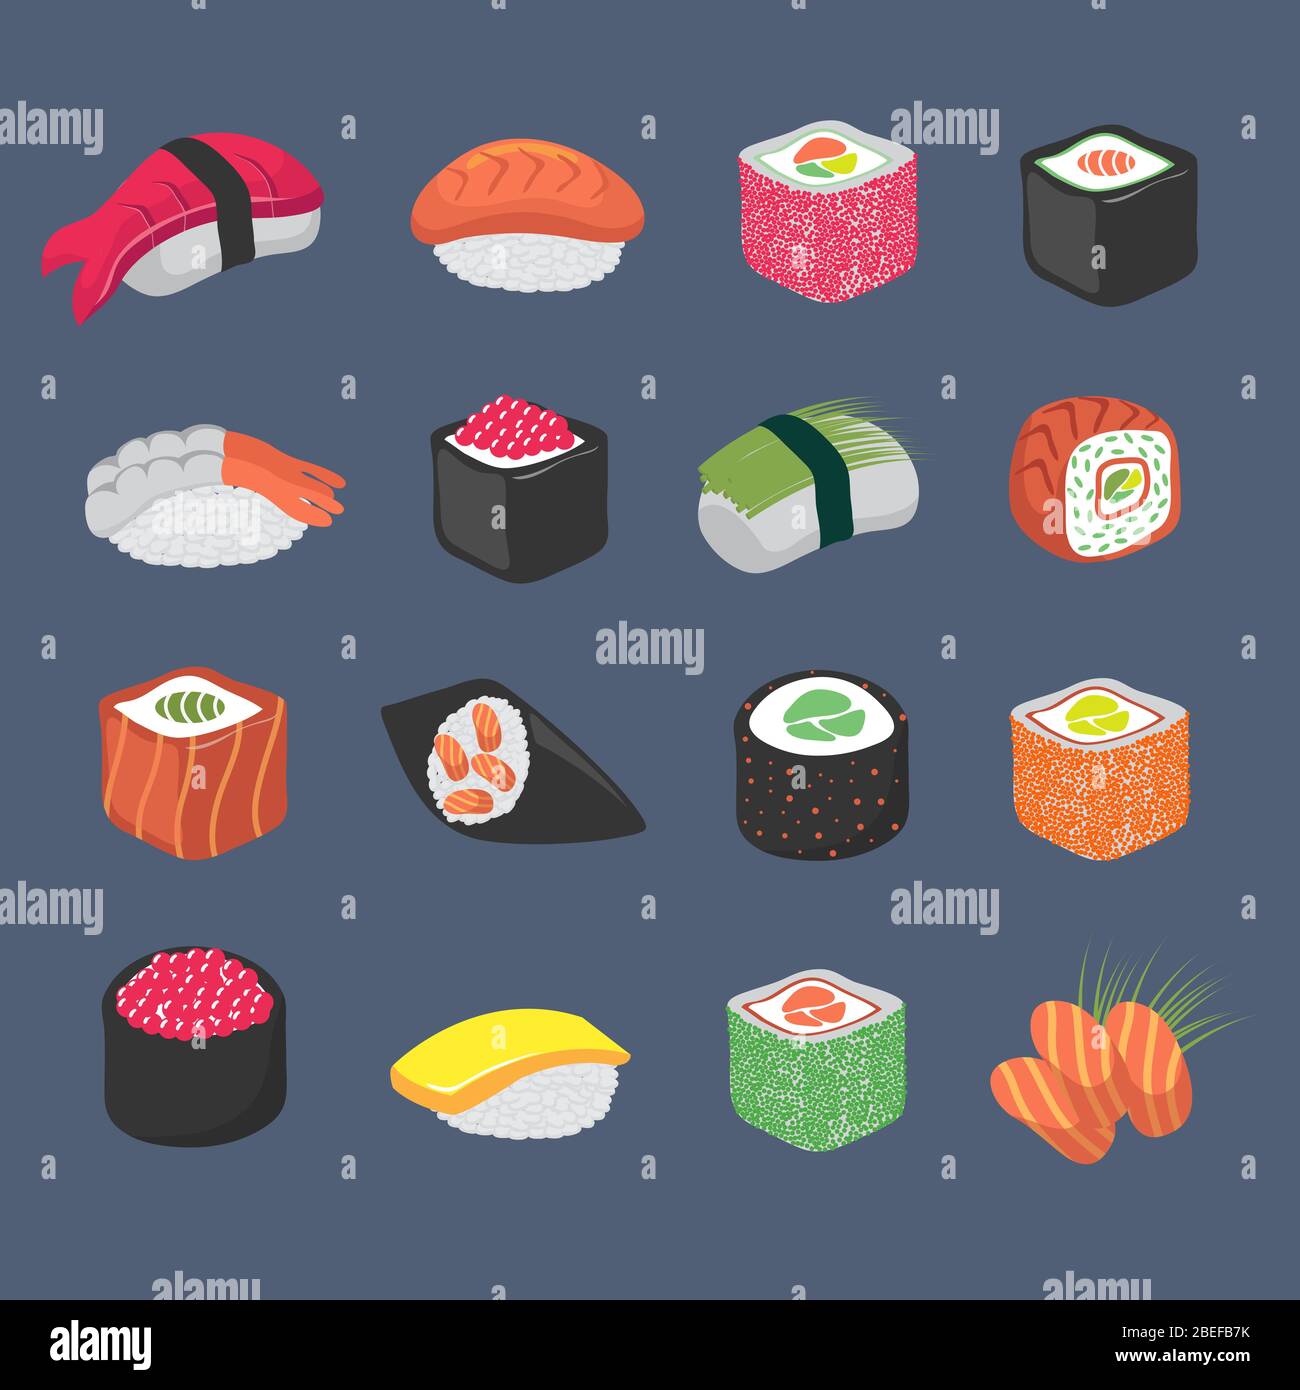 Cartoon sushi rolls japanese cuisine seafood vector set. Sushi food, roll with salmon and seaweed illustration Stock Vector